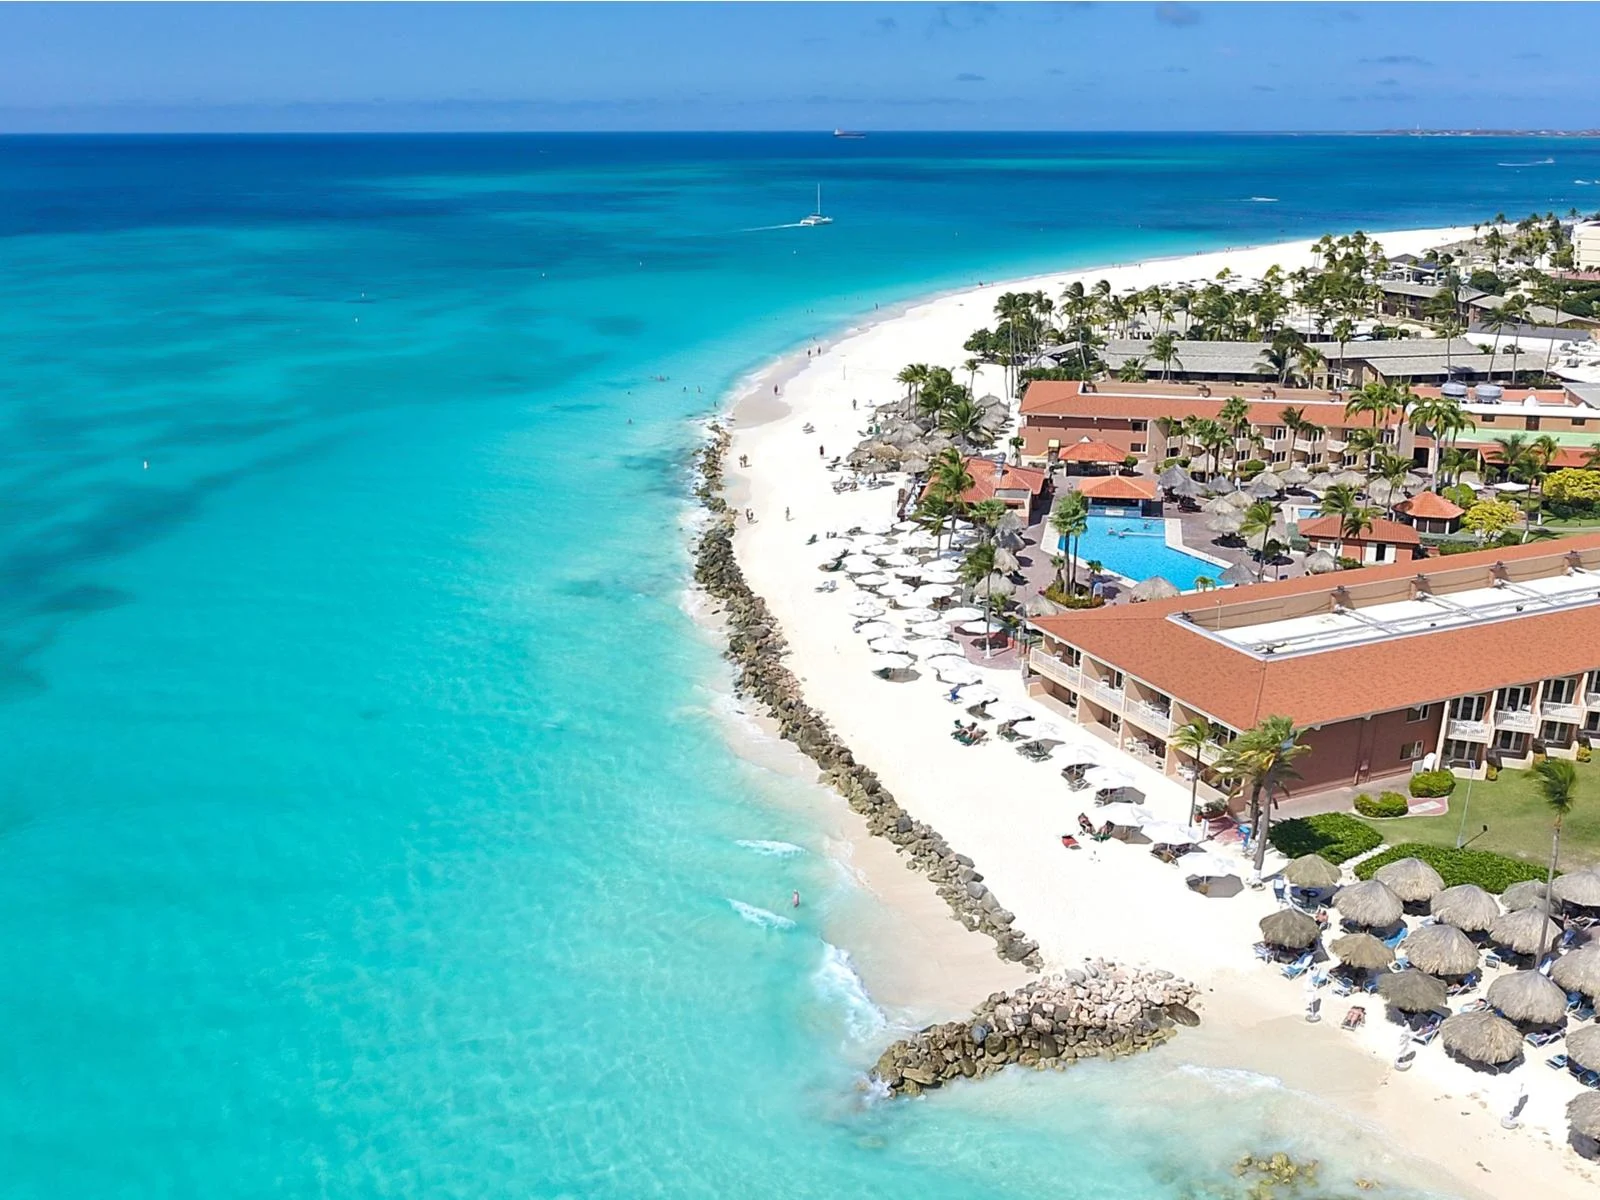 Large hotels, several native huts, tall palm trees, tourists on sunloungers with white umbrellas and others enjoying the beach and shore, and boats sailing at the distant deep waters of Manchebo Beach, seen on an aerial view at one of the best beaches in Aruba